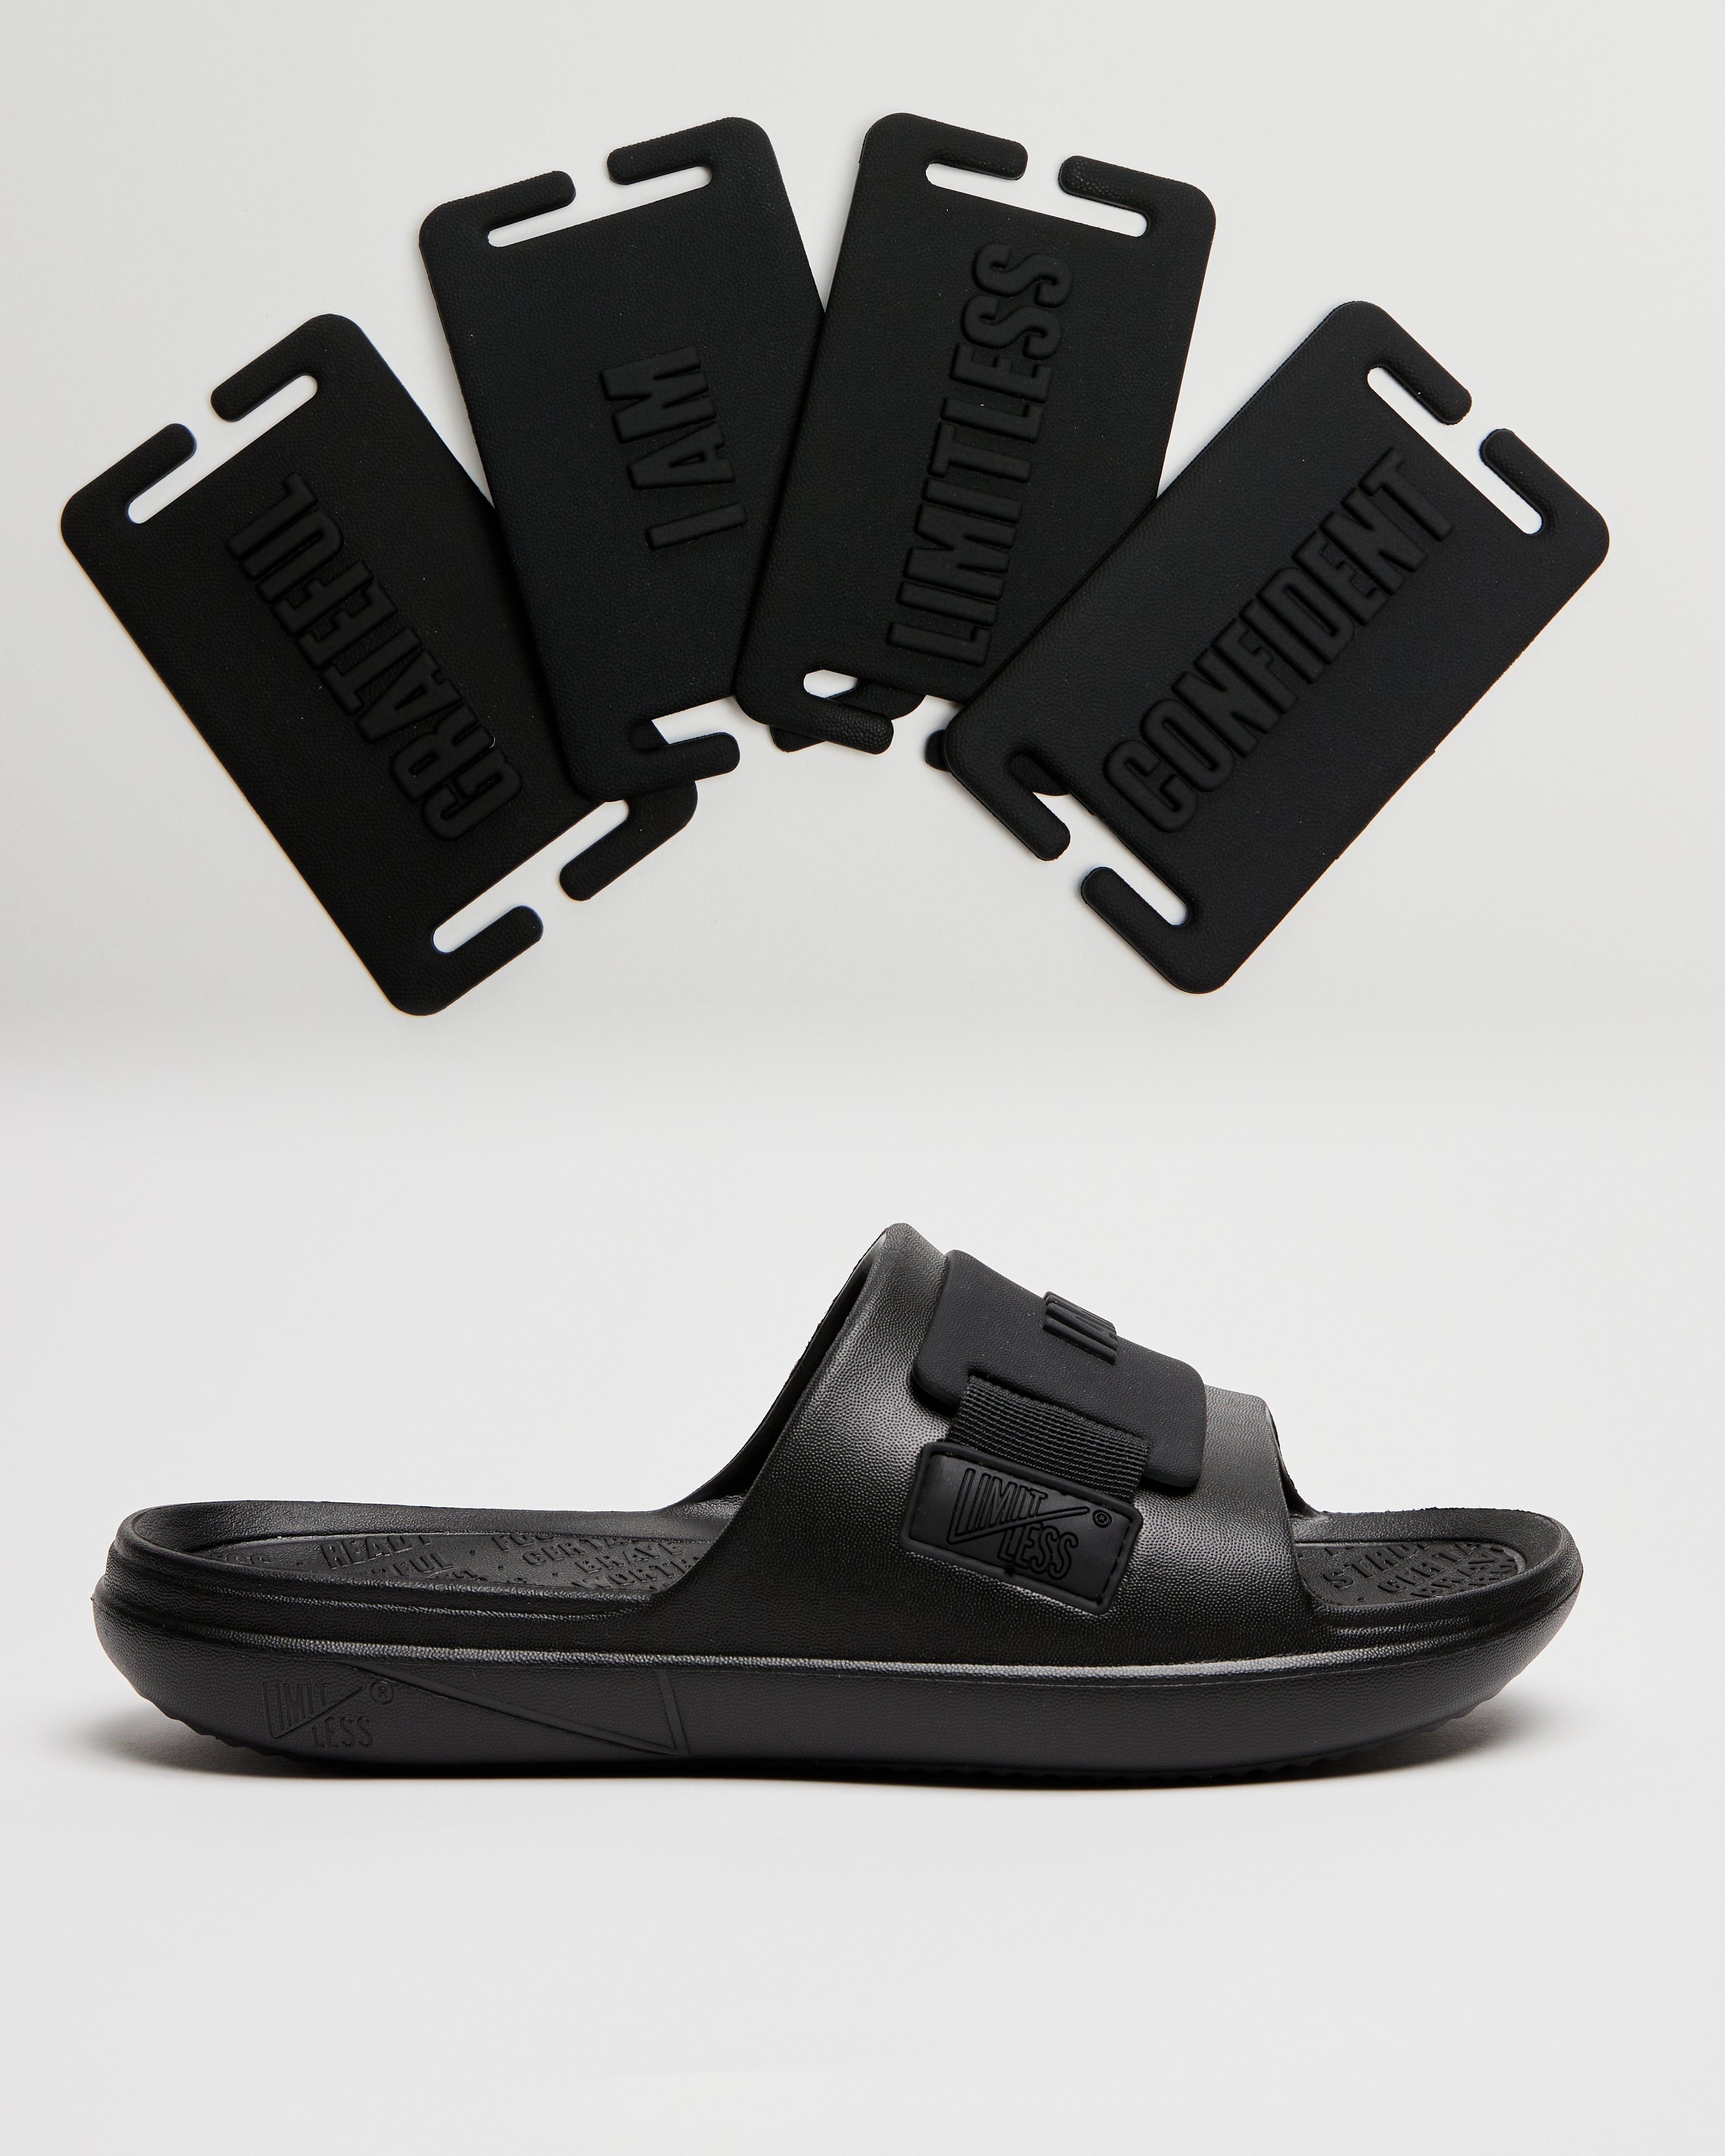 LIMITLESS SLIDES™ WITH ESSENTIAL TIBAH™ QUAD - CANYON HIGH SCHOOL EDITION